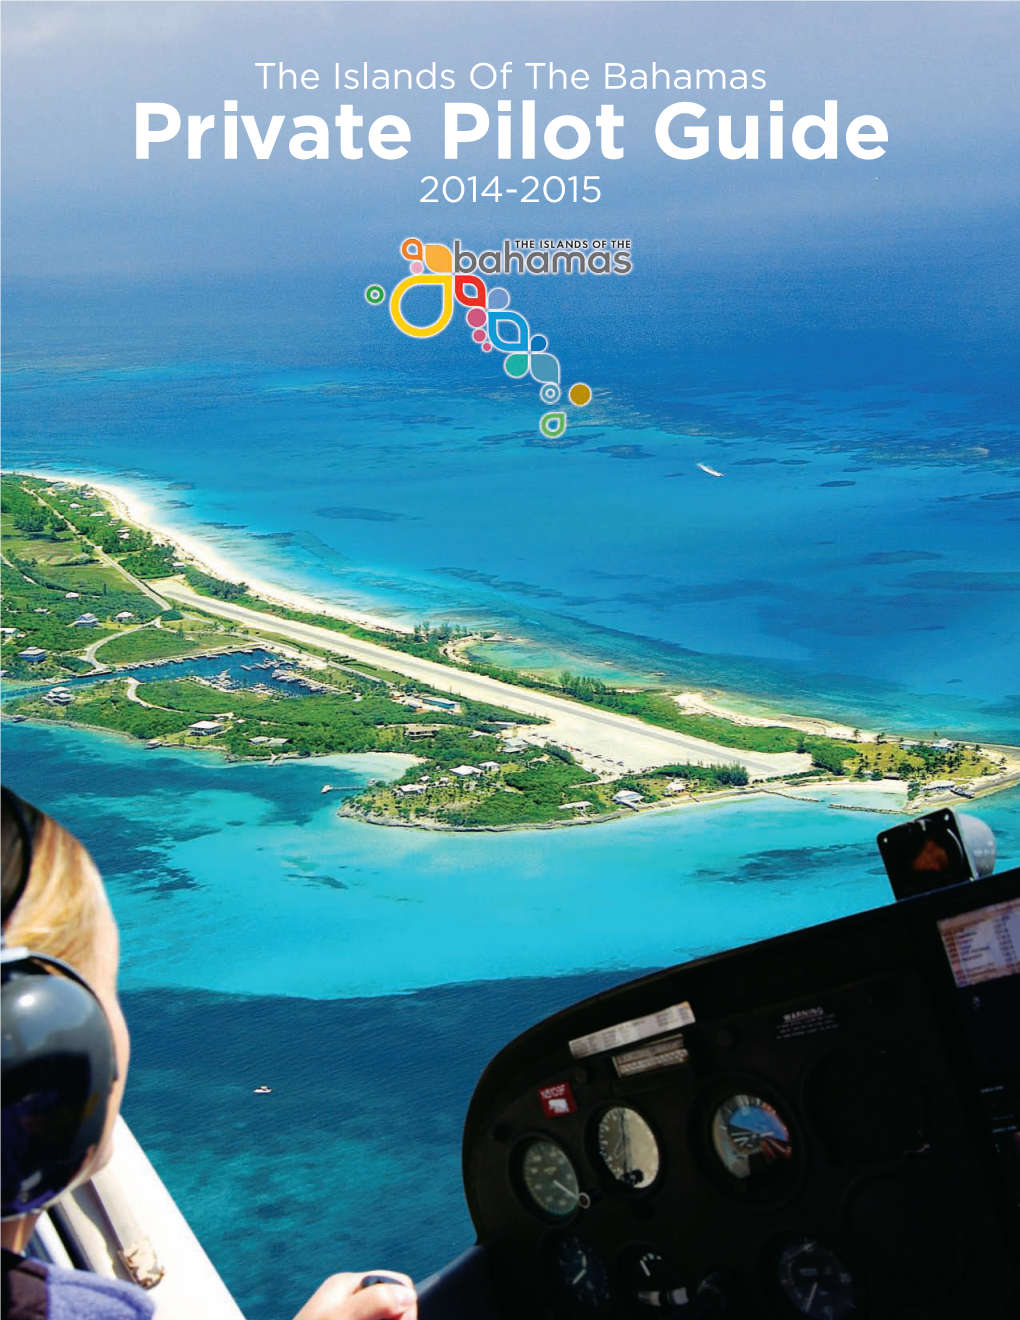 Private Pilot Guide to the Bahamas